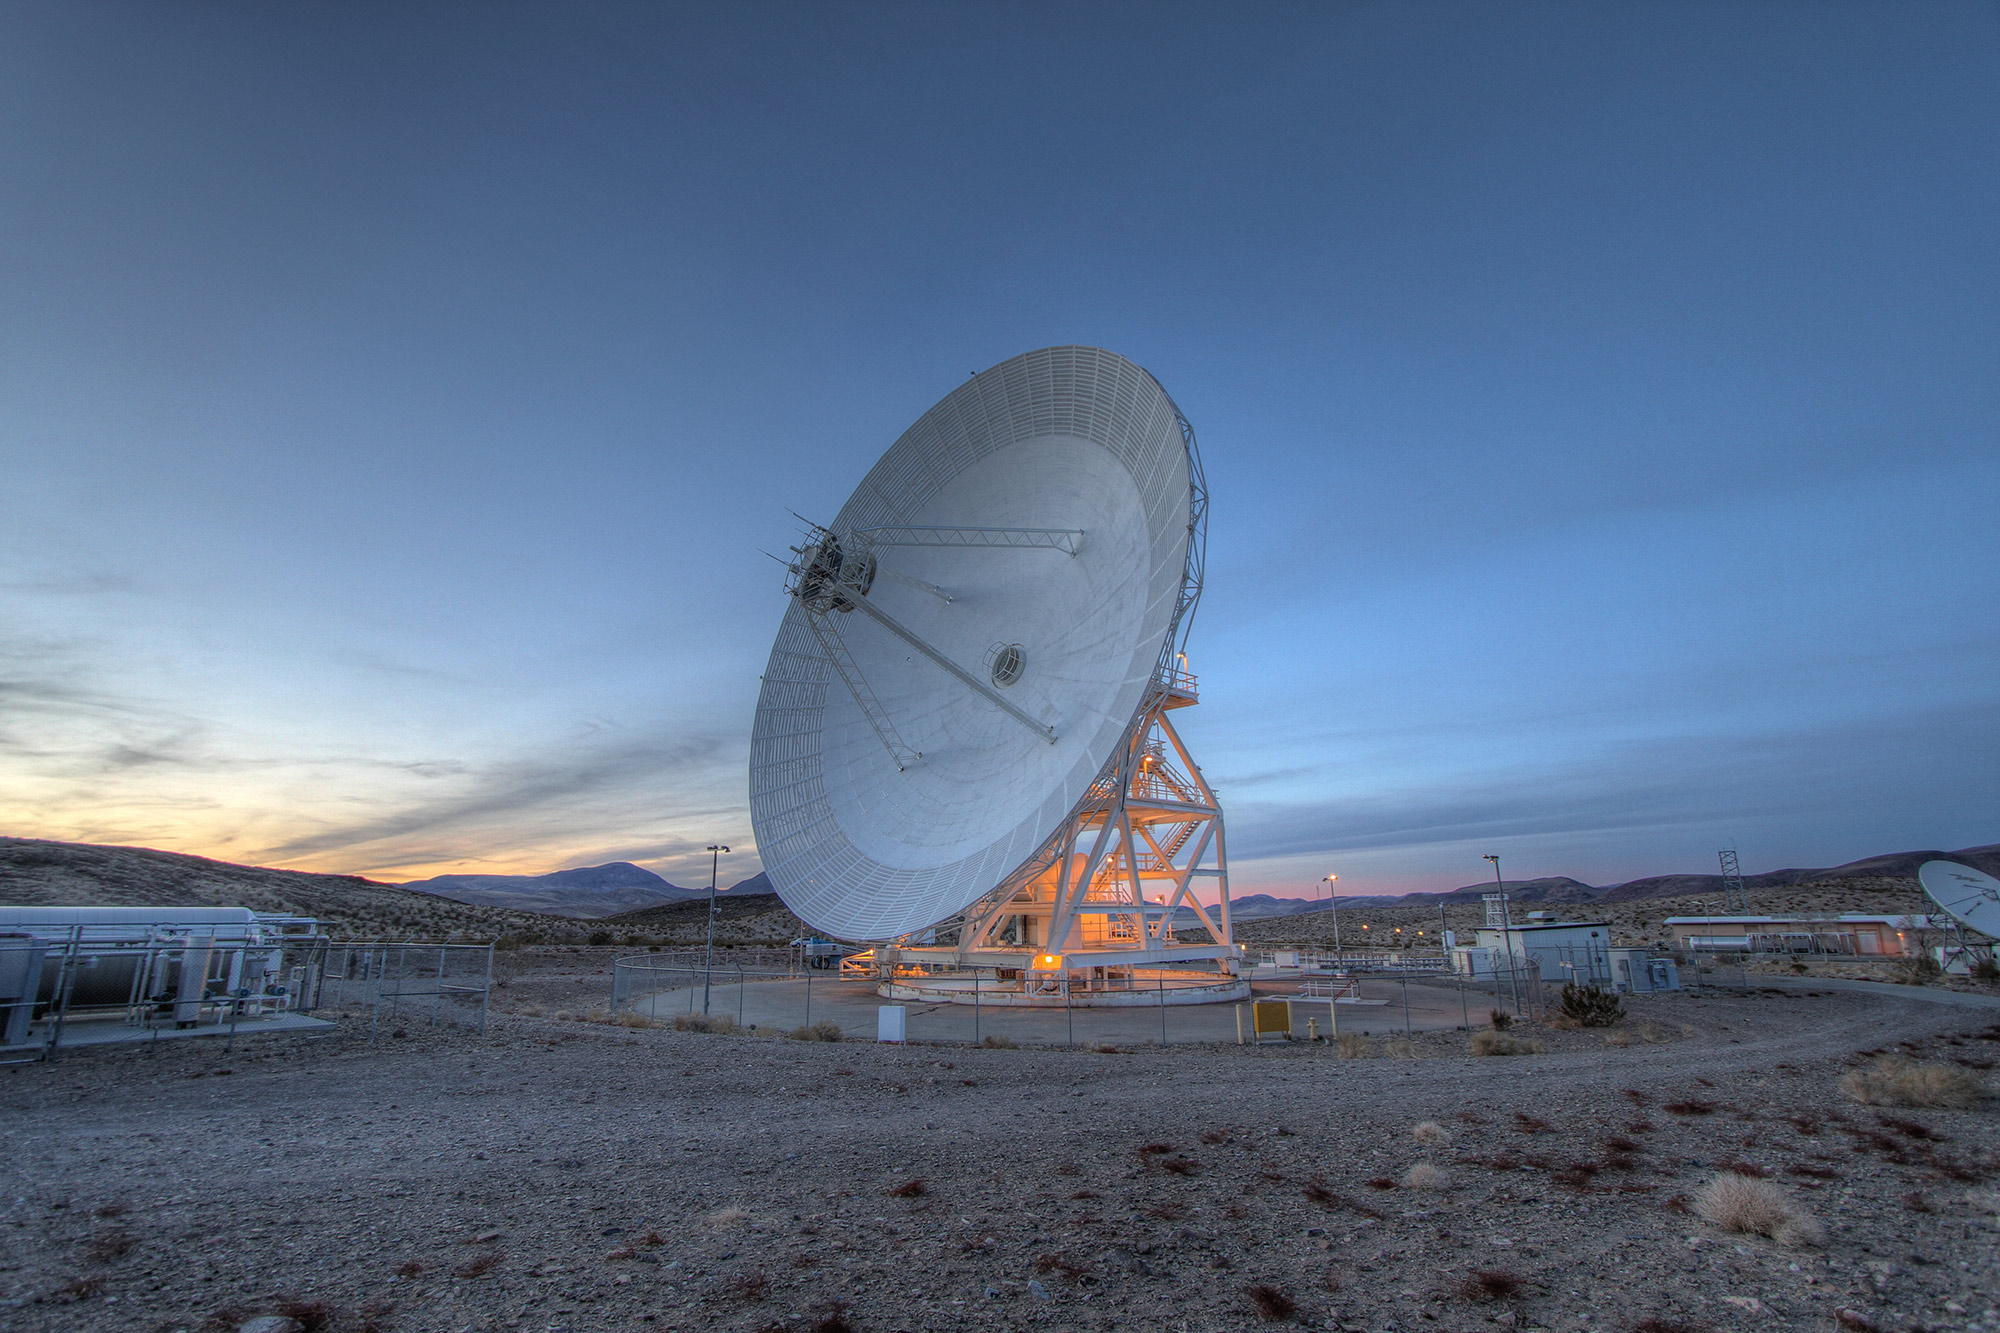 A large parabolic dish with its antenna suspended above the center by three metal supports, like legs on a stool, faces the 9 o'clock position in the image. The dish is surrounded by a desert landscape and pictured during sunset.